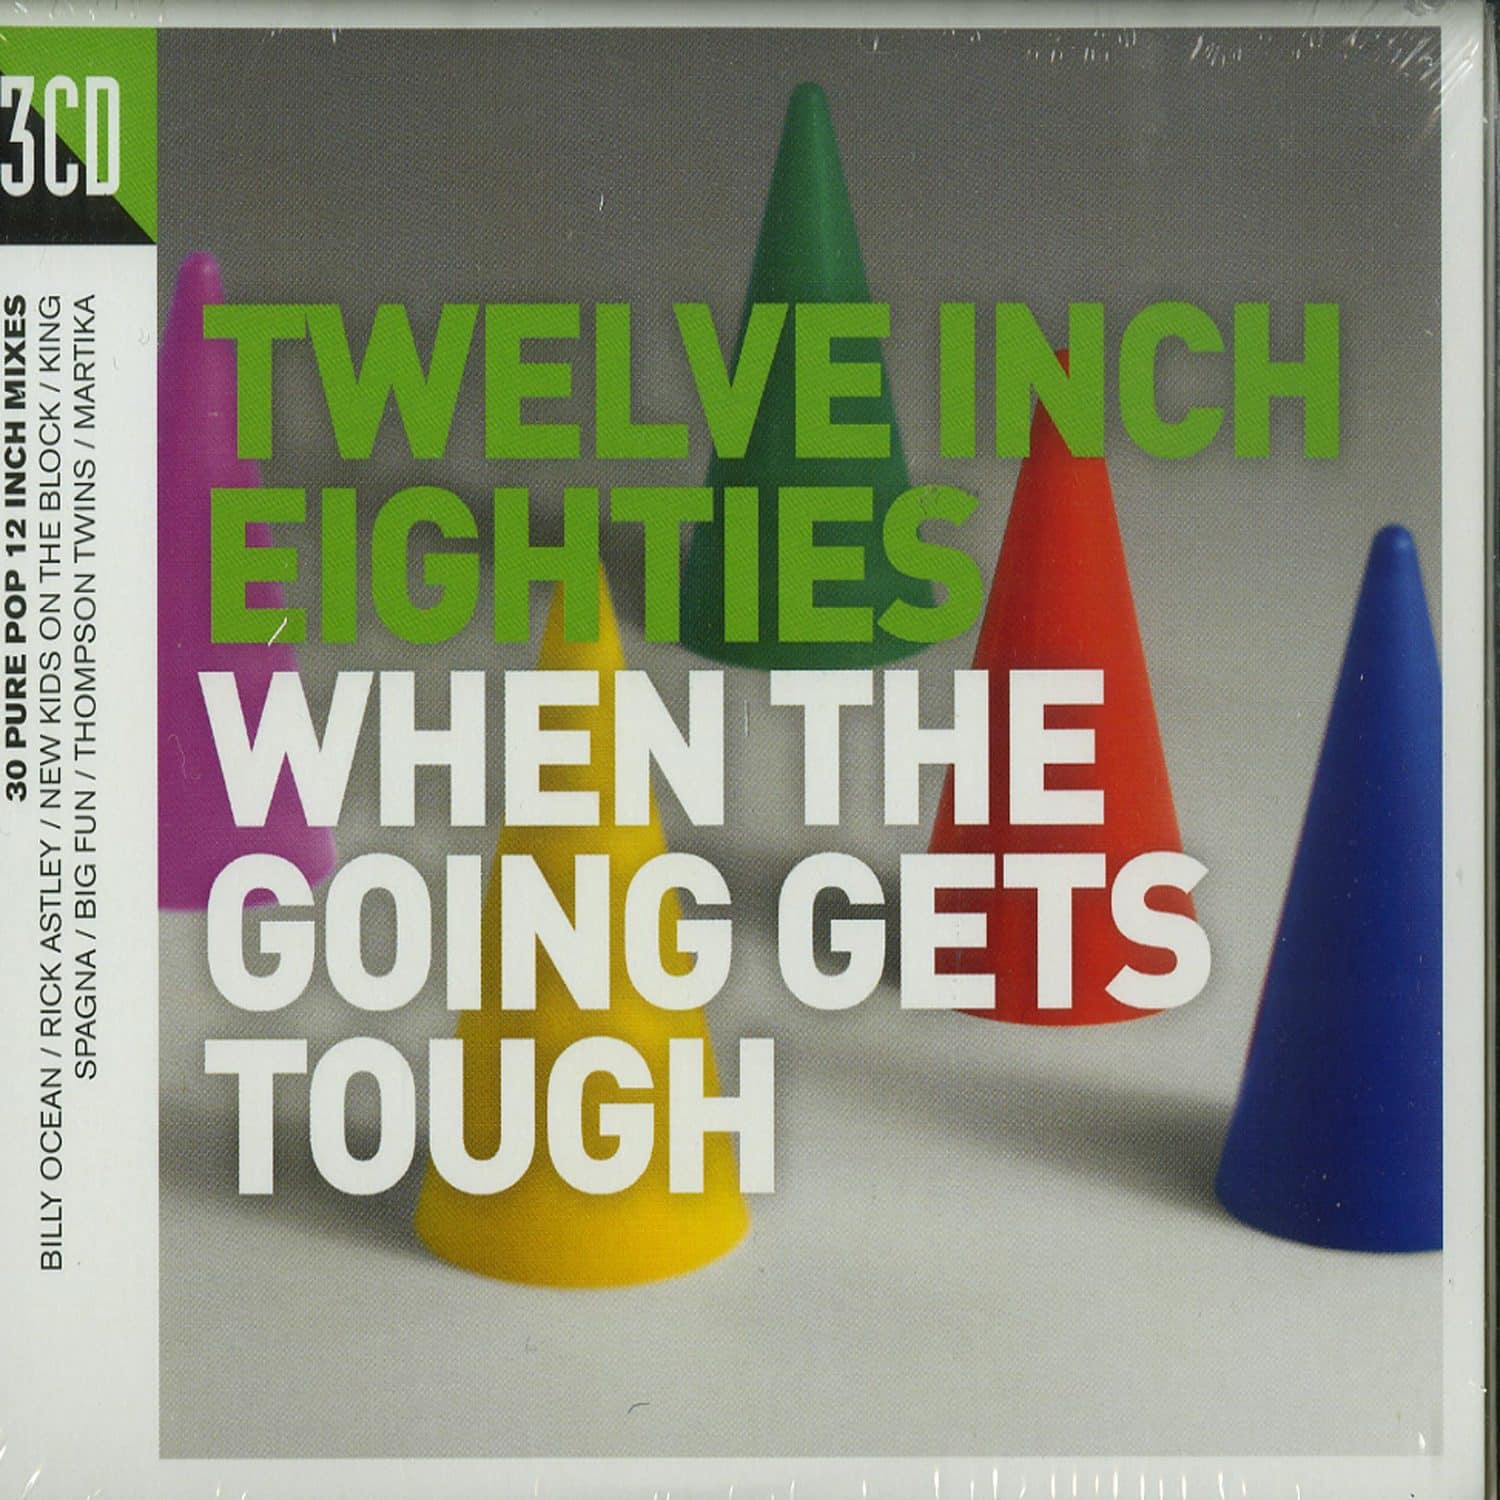 Various Artists - TWELVE INCH EIGHTIES: WHEN THE GOING GETS THOUGH 